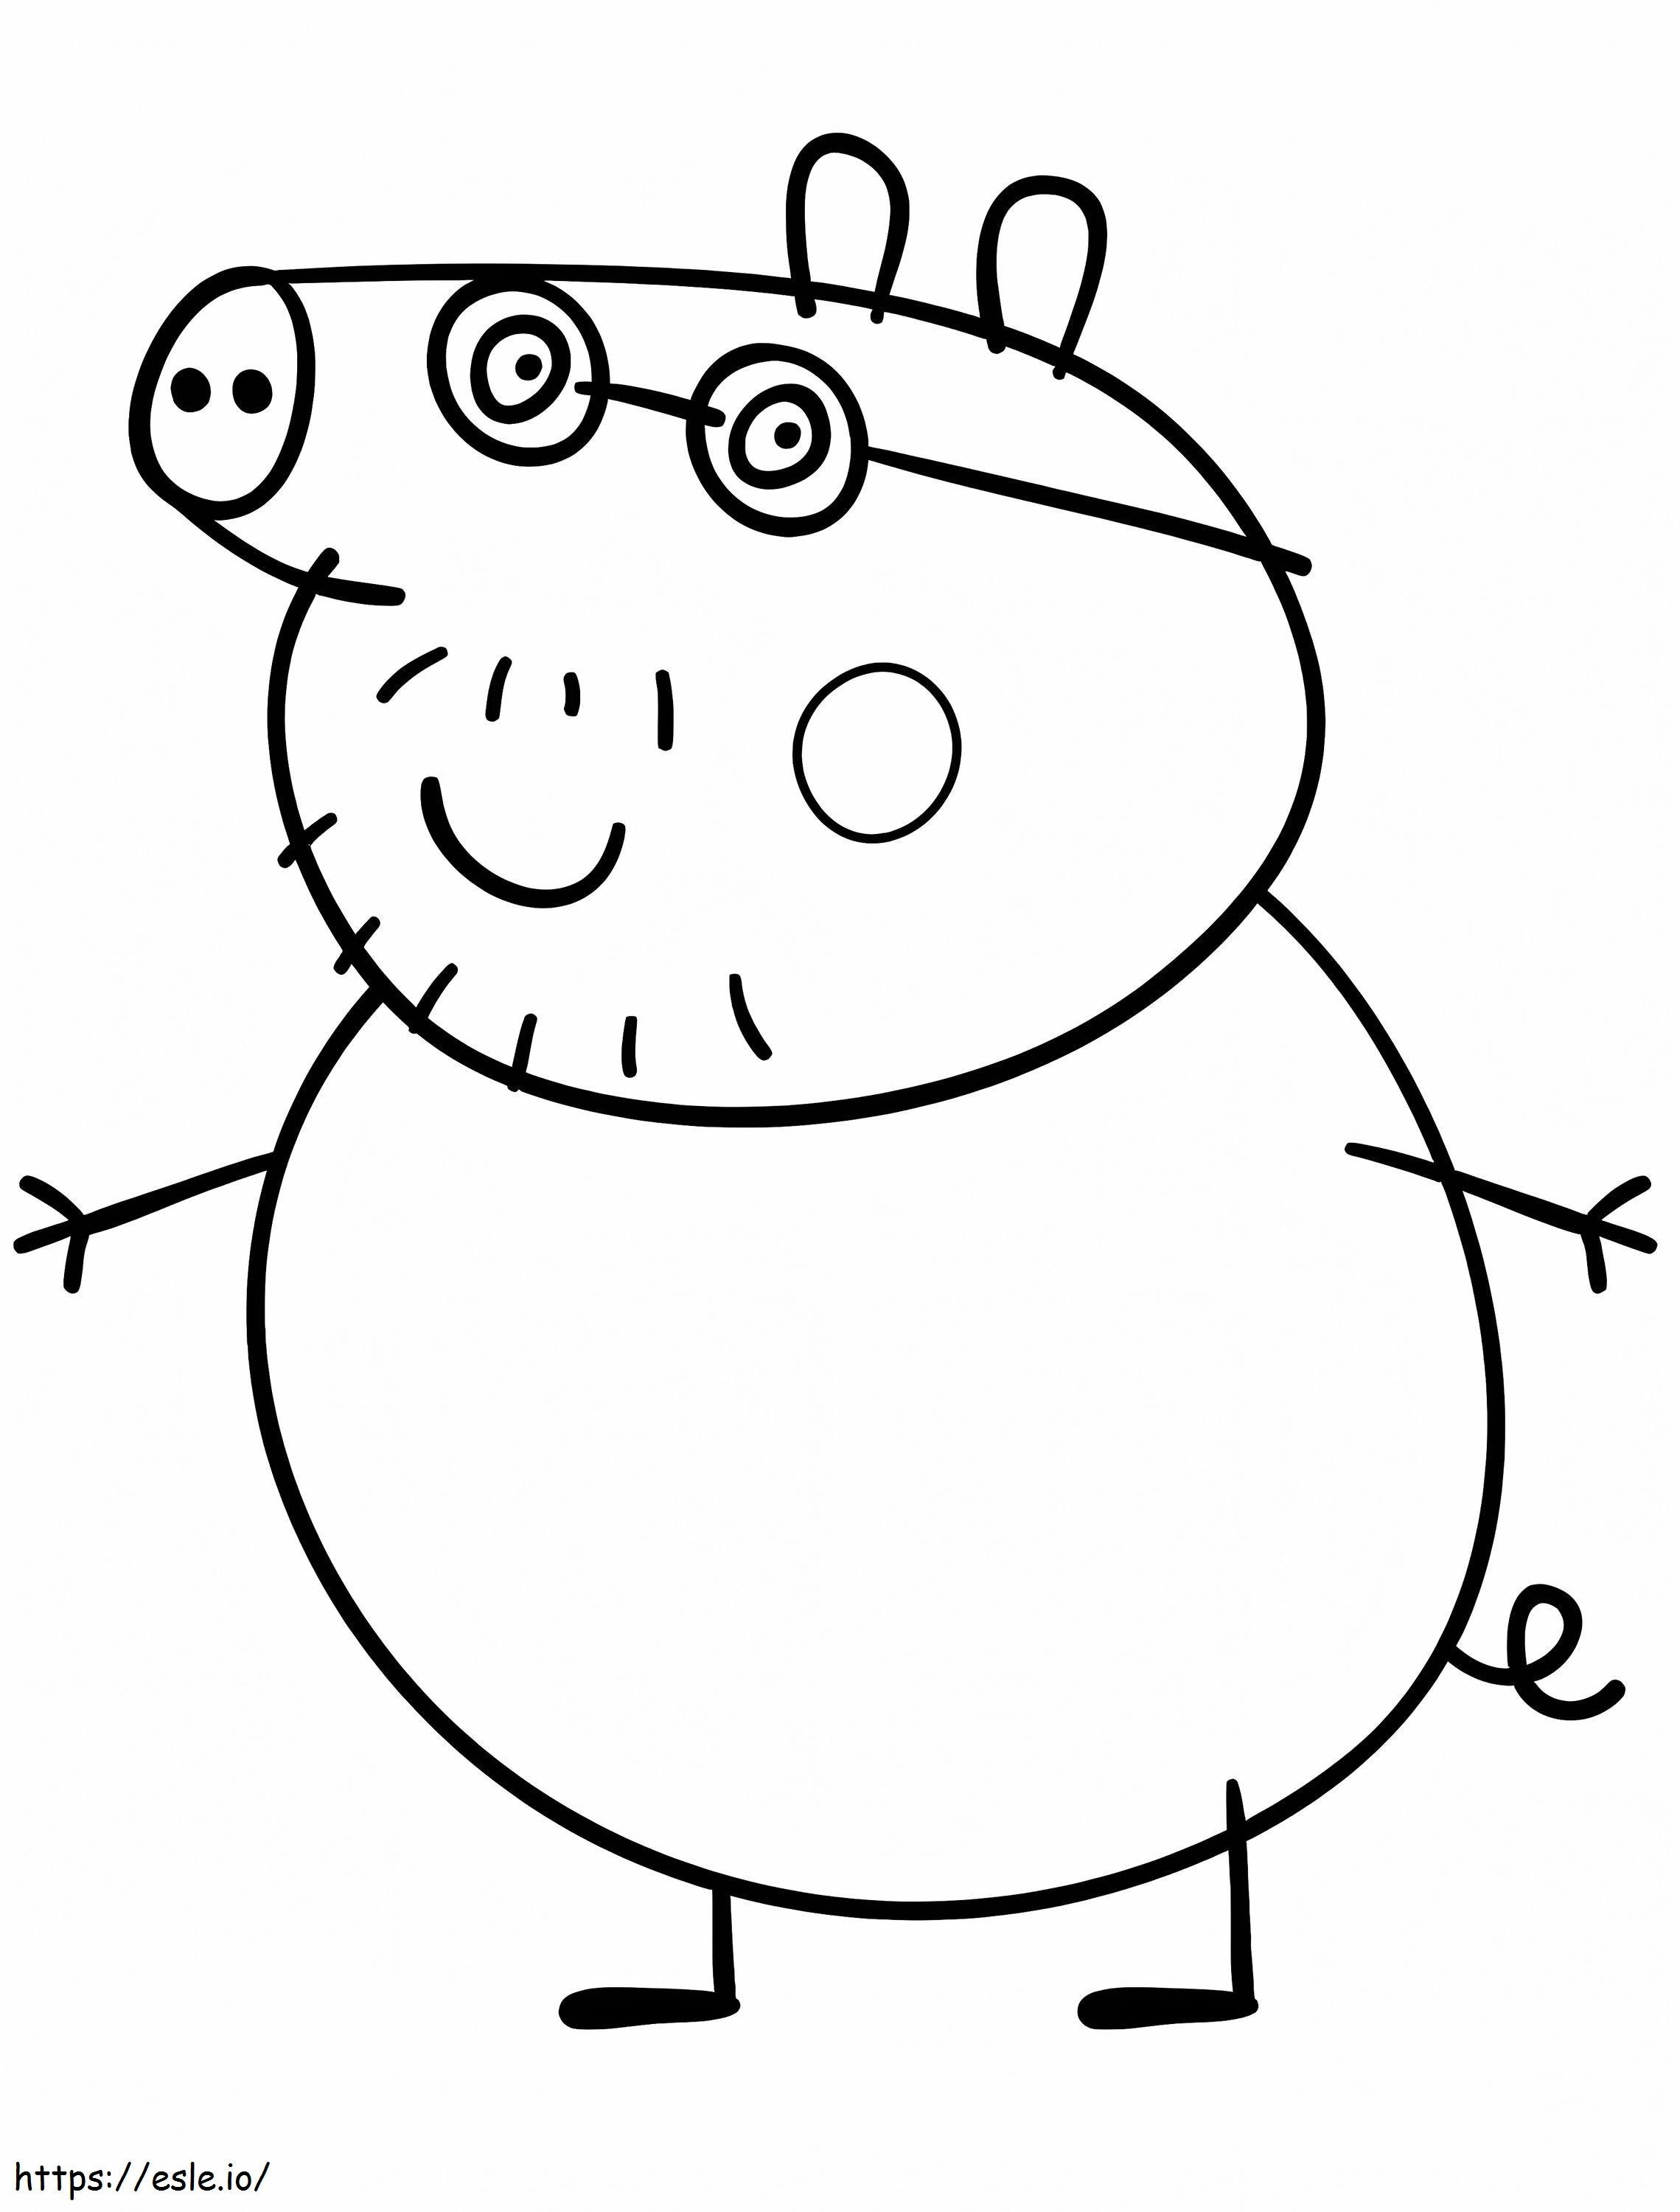 Daddy Pig coloring page